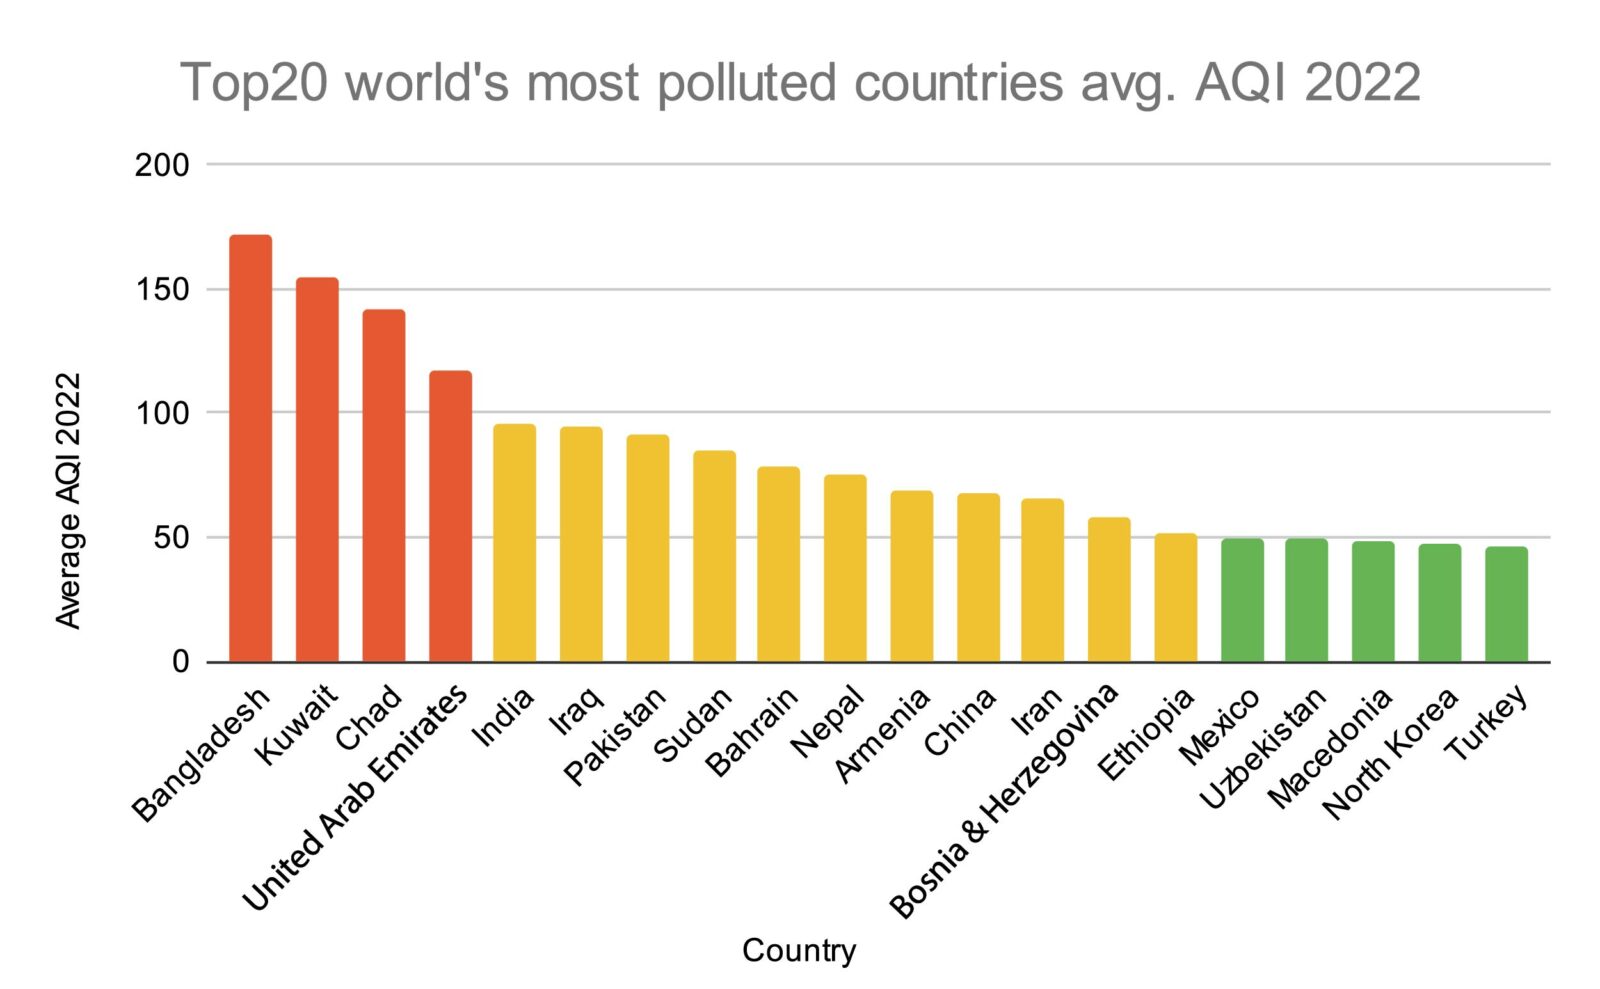 Top 10 Most Polluted Cities in the World (2022 data) AQI